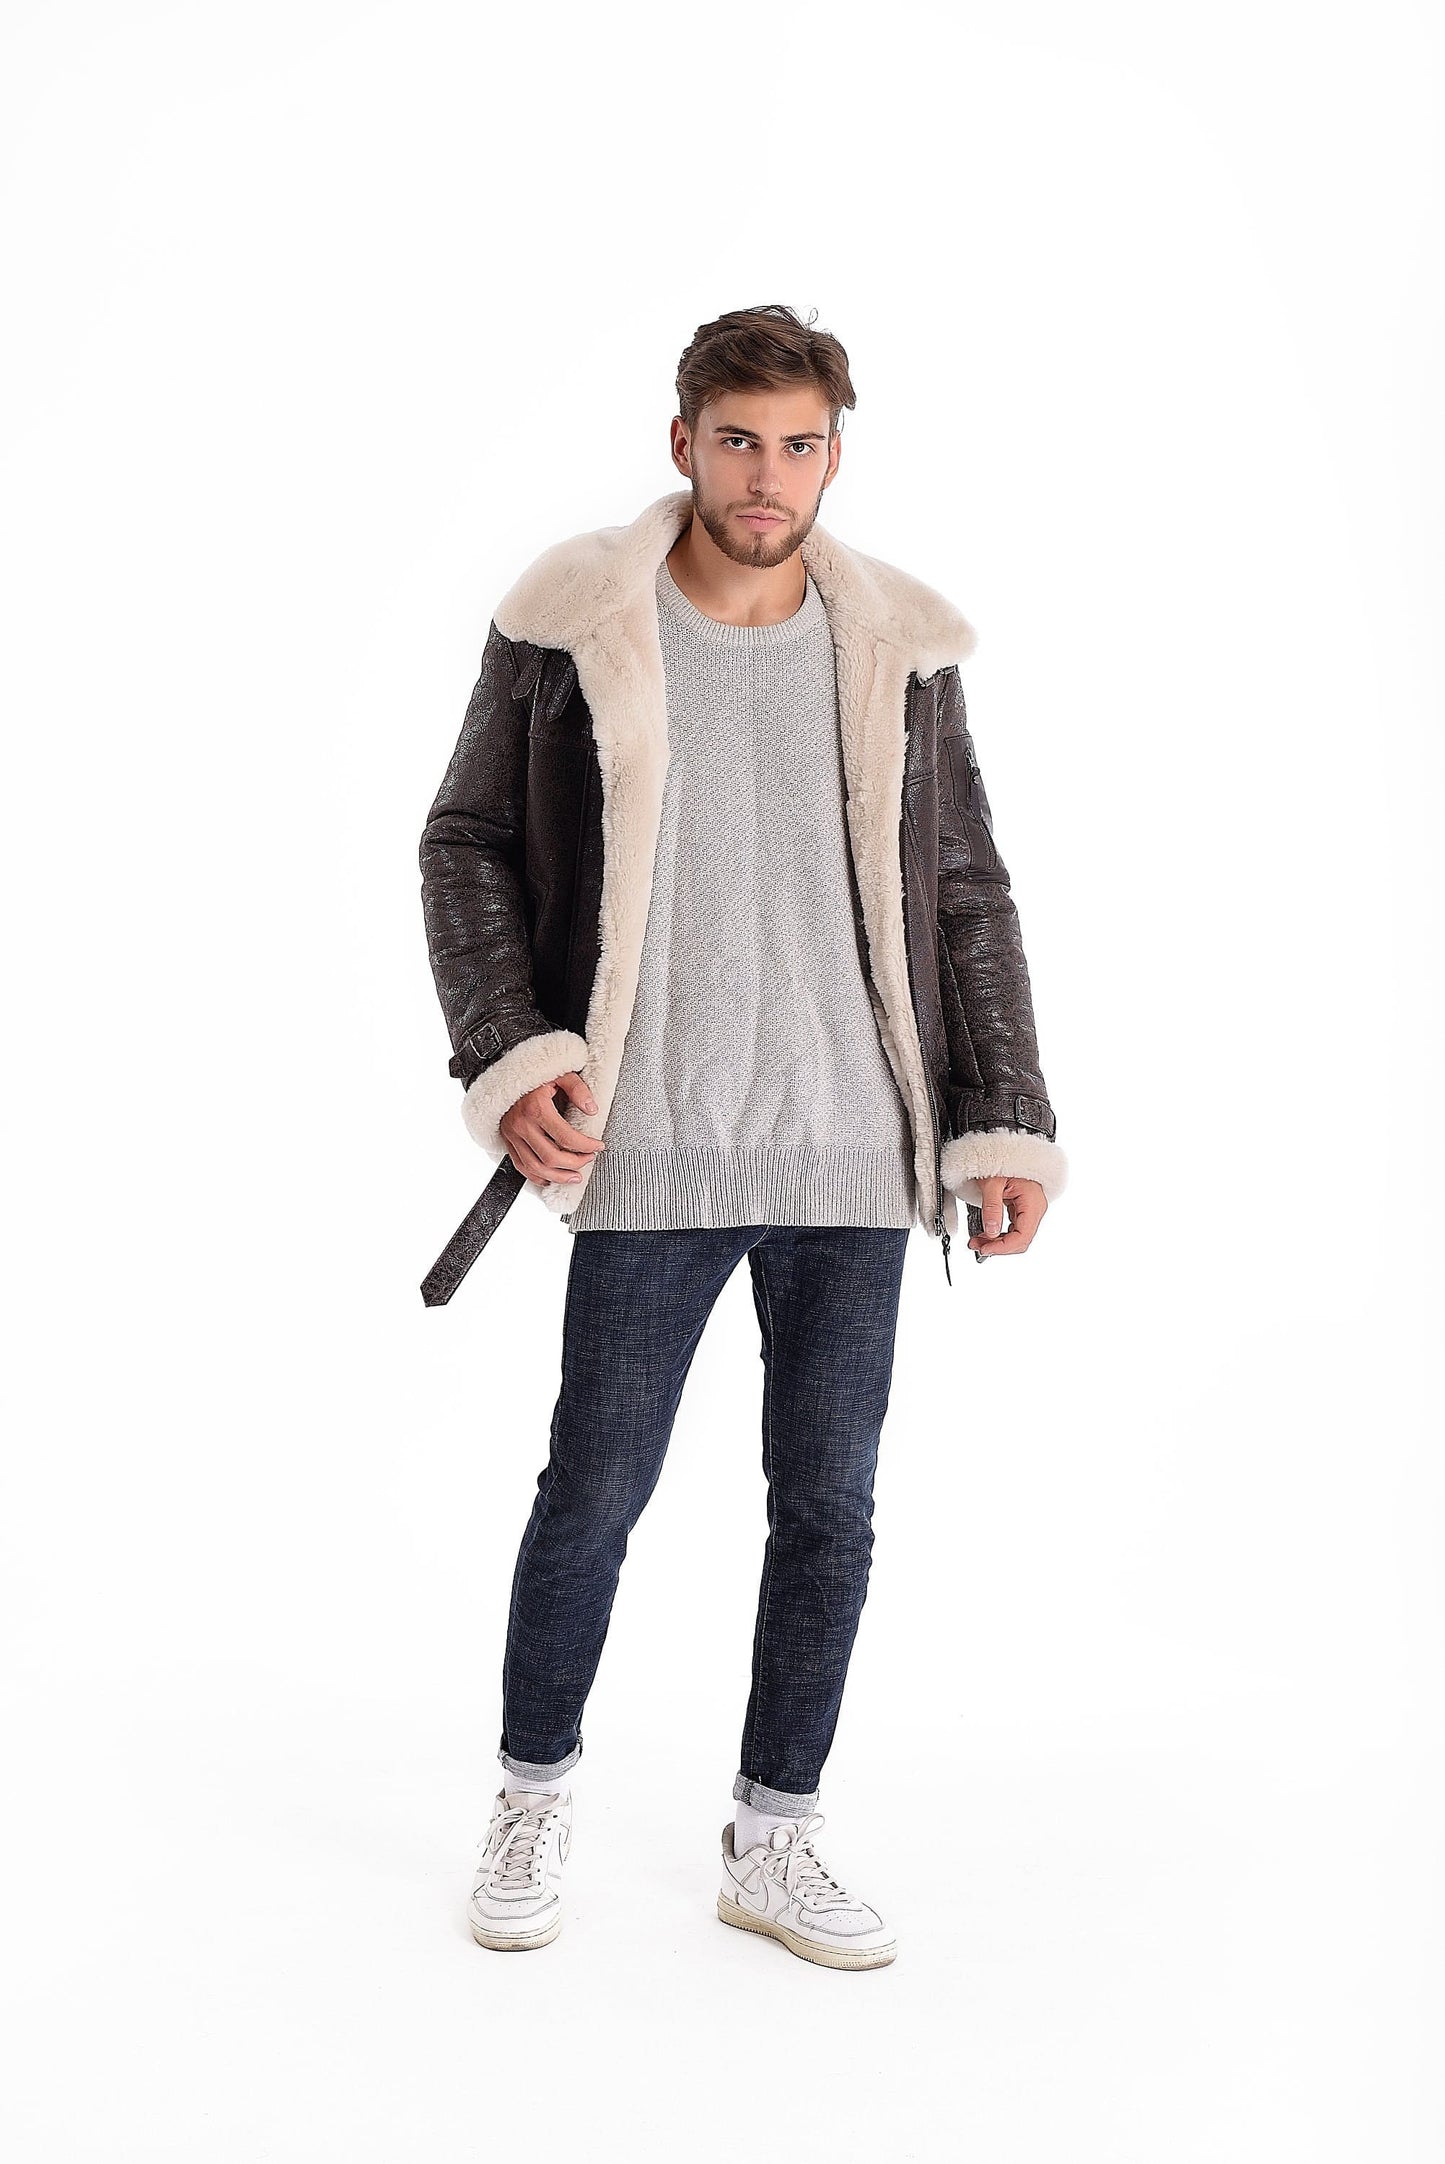 Real Shearling Sheepskin Leather Mens Pilot Jacket in Brown Color with Light Fur Lining